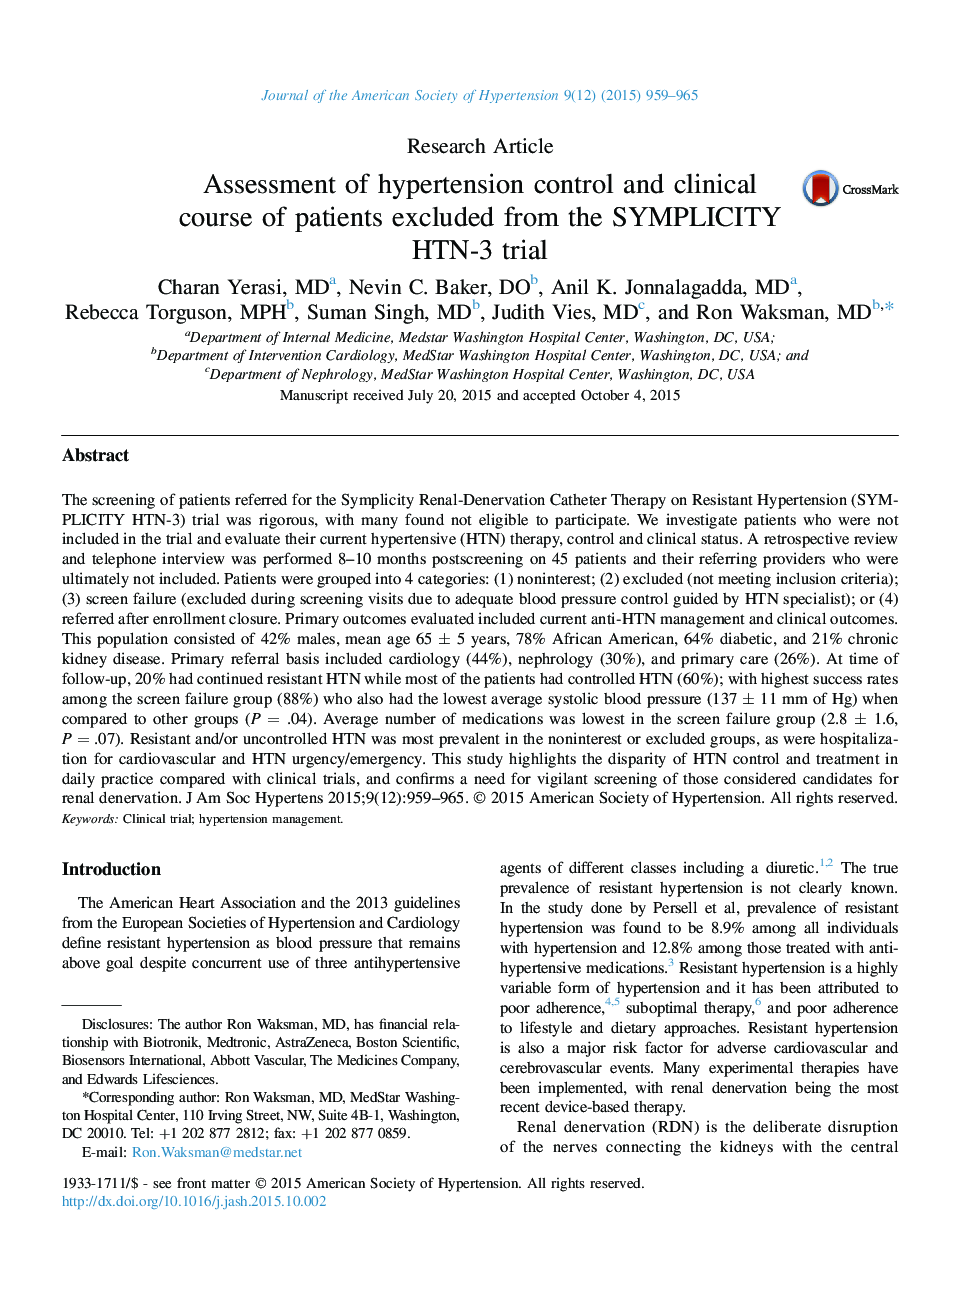 Assessment of hypertension control and clinical course of patients excluded from the SYMPLICITY HTN-3 trial 